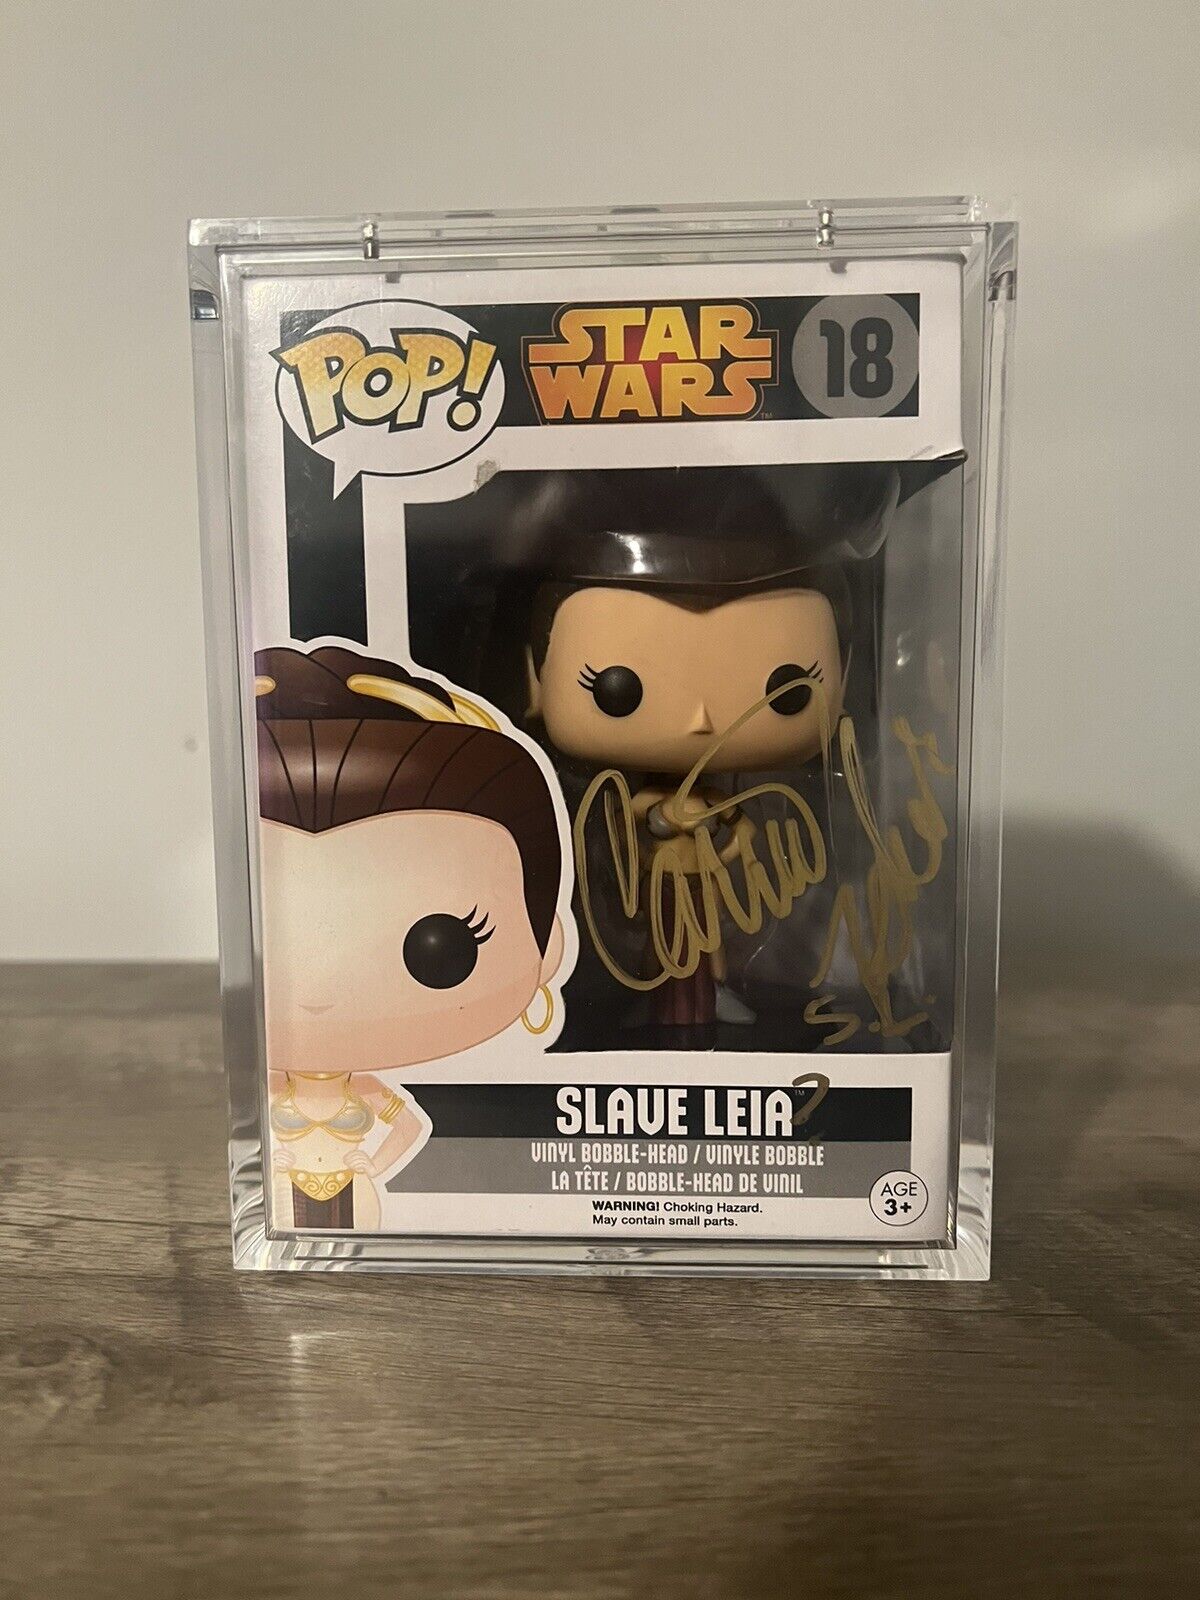 Carrie Fisher Signed Slave Leia Funko Pop Star Wars #18 JSA FULL AUTHENTICATION